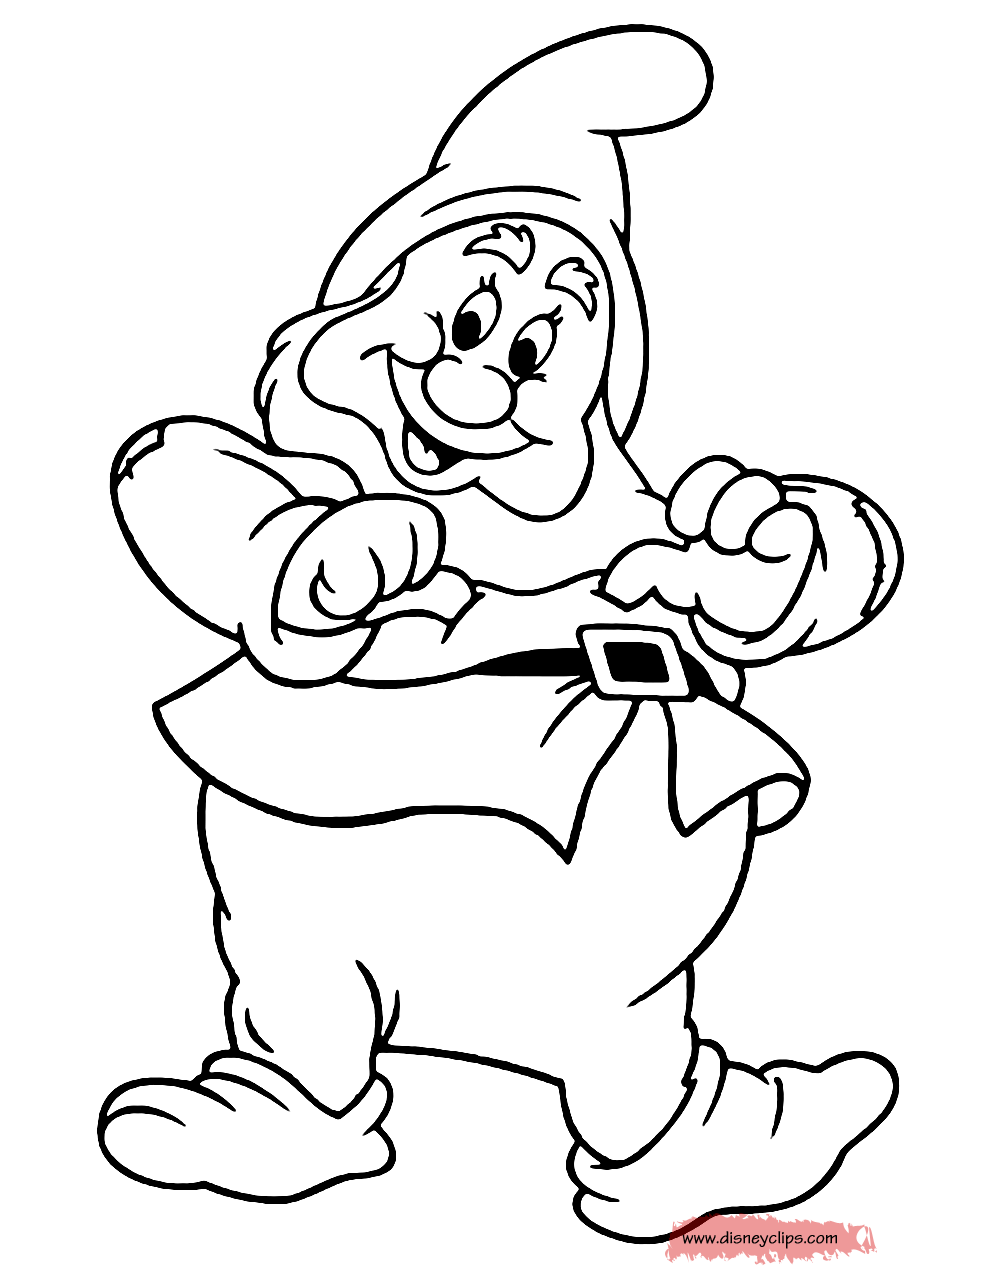 Download Snow White and the Seven Dwarfs Coloring Pages (3) | Disneyclips.com